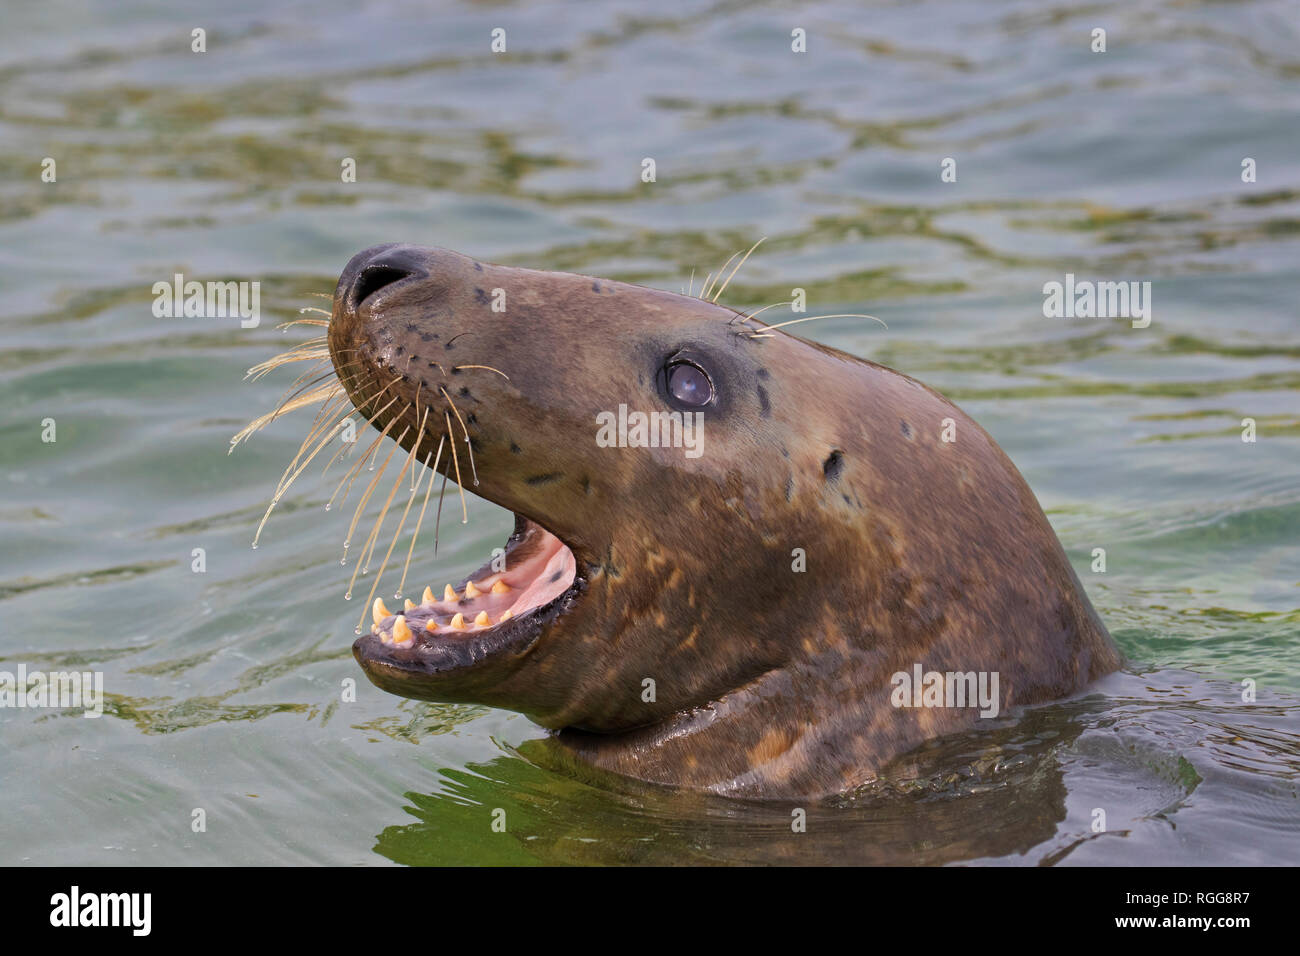 Grey seal / gray seal (Halichoerus grypus) calling while swimming in sea. Close-up of head showing large whiskers and teeth Stock Photo